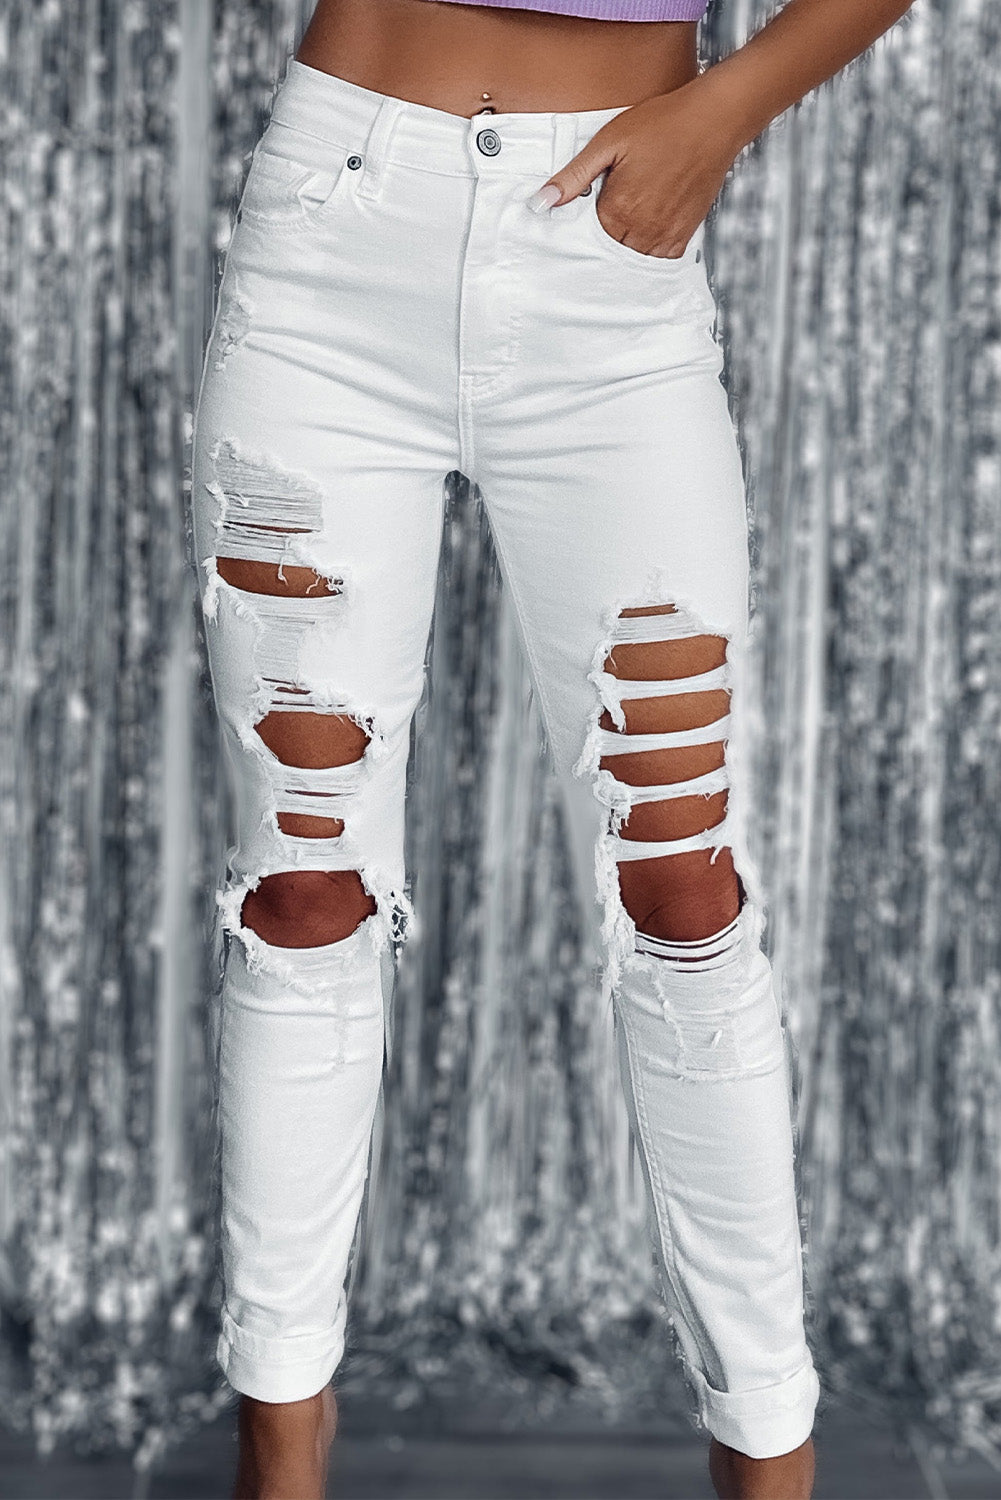 White Distressed Ripped Holes High Waist Skinny Jeans - SELFTRITSS